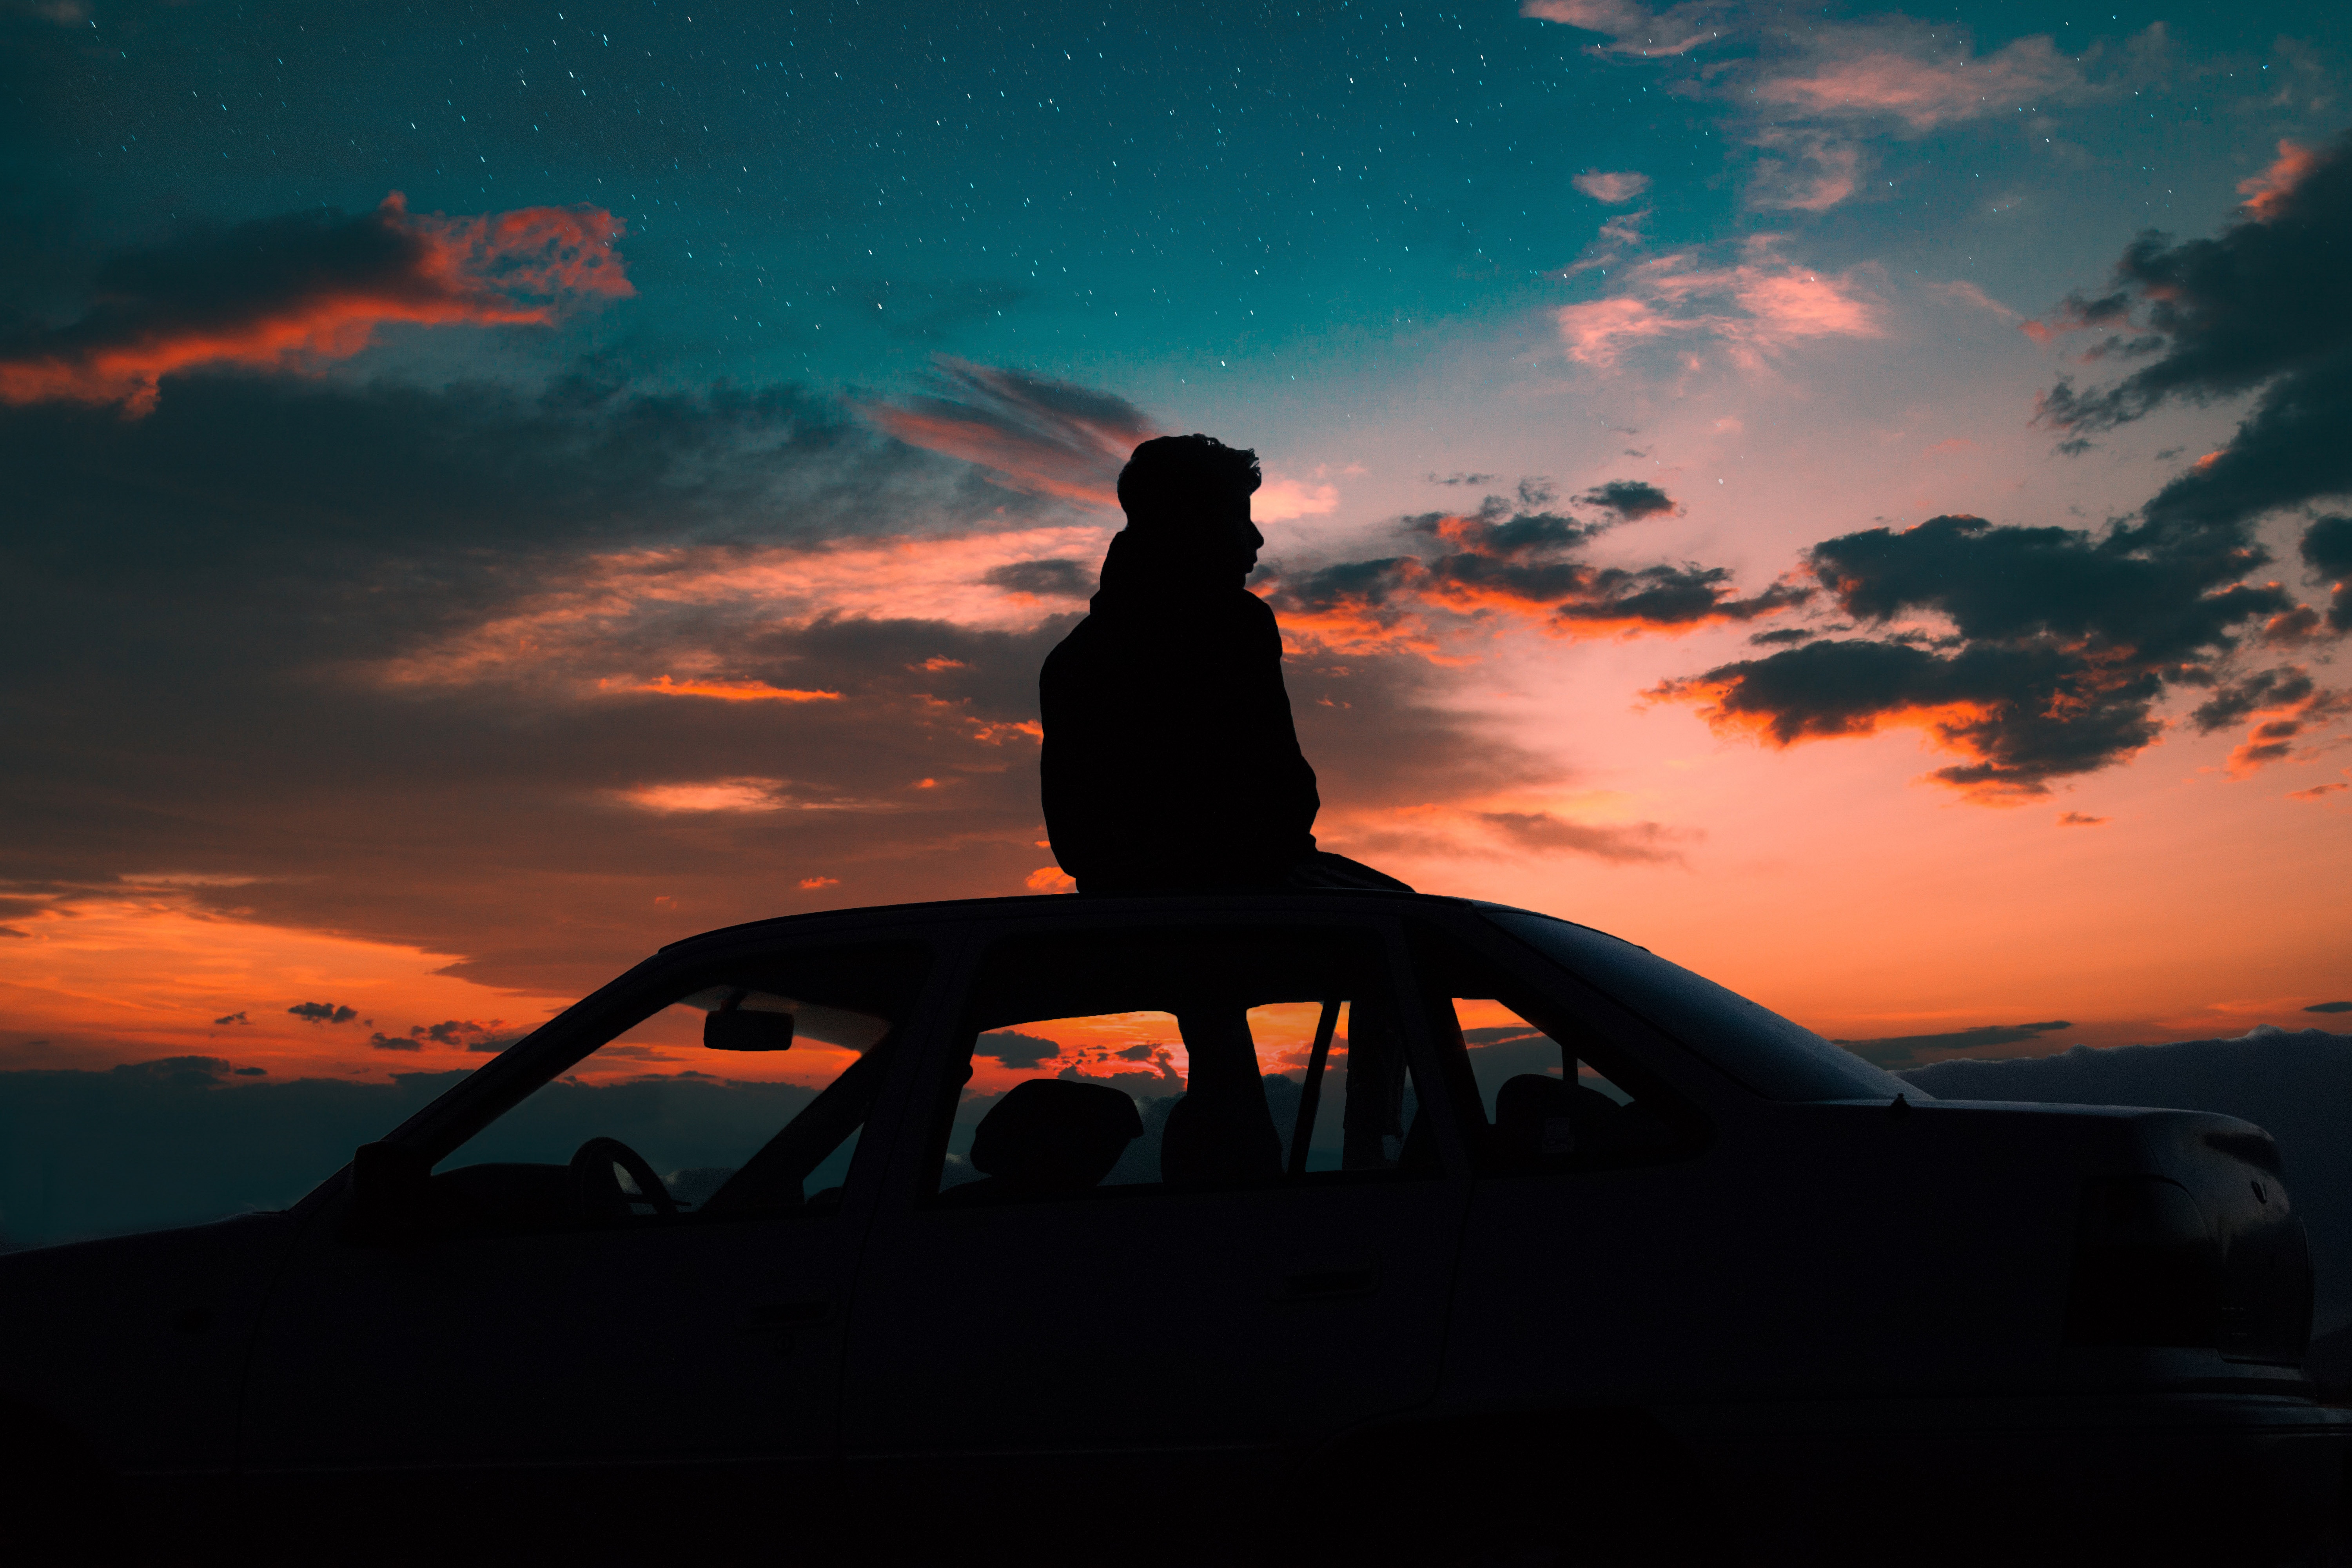 loneliness, privacy, person, human, dark, seclusion, car, starry sky